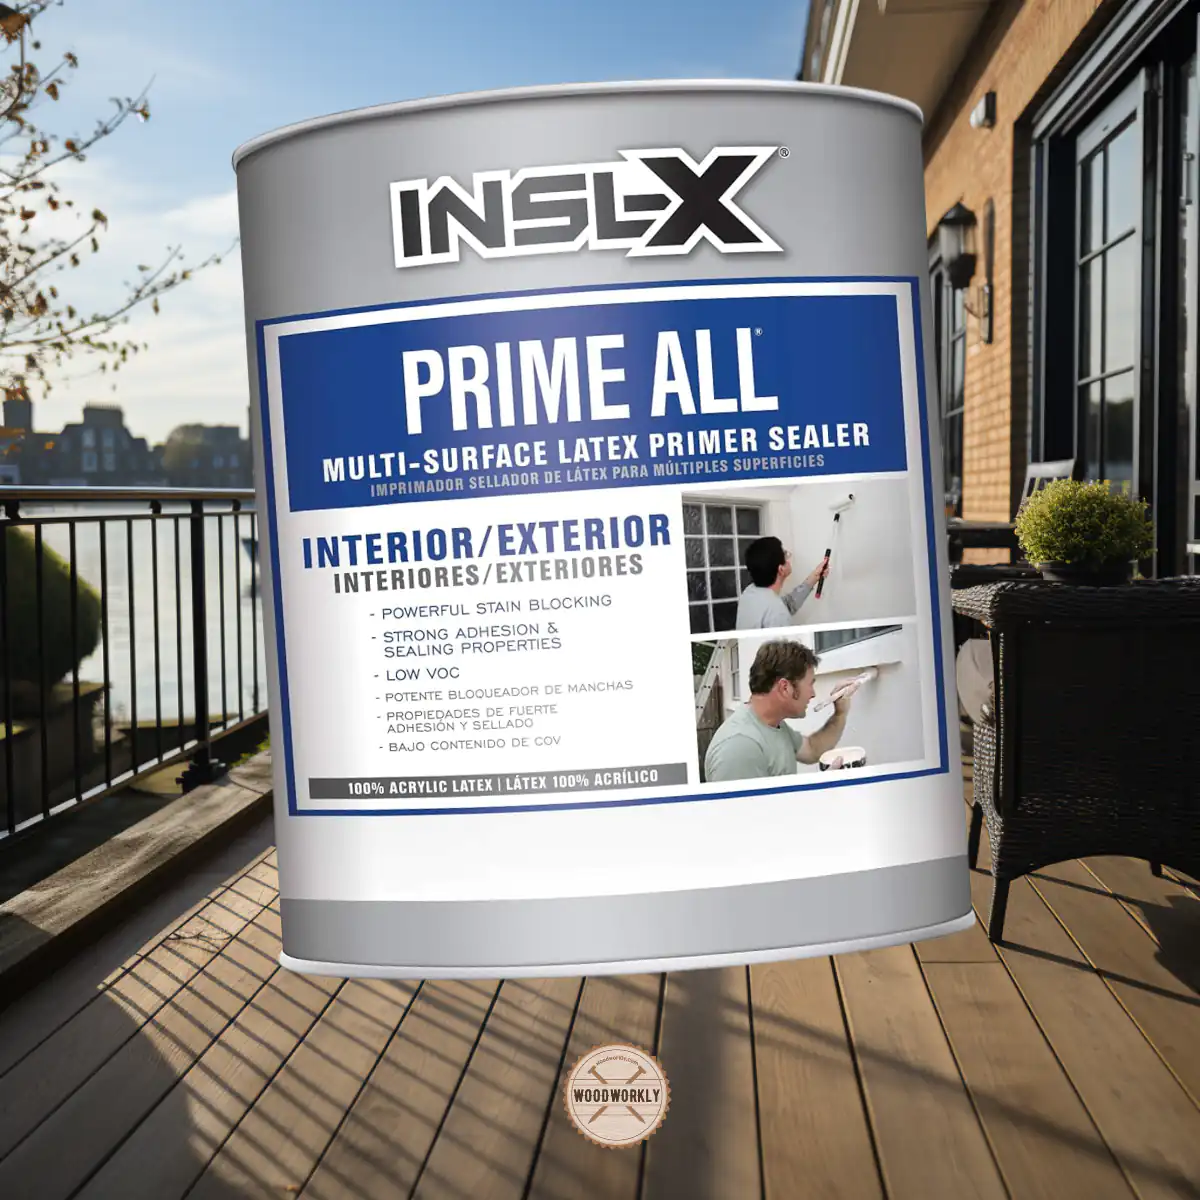 INSL-X Prime All Multi-Surface Acrylic Primer